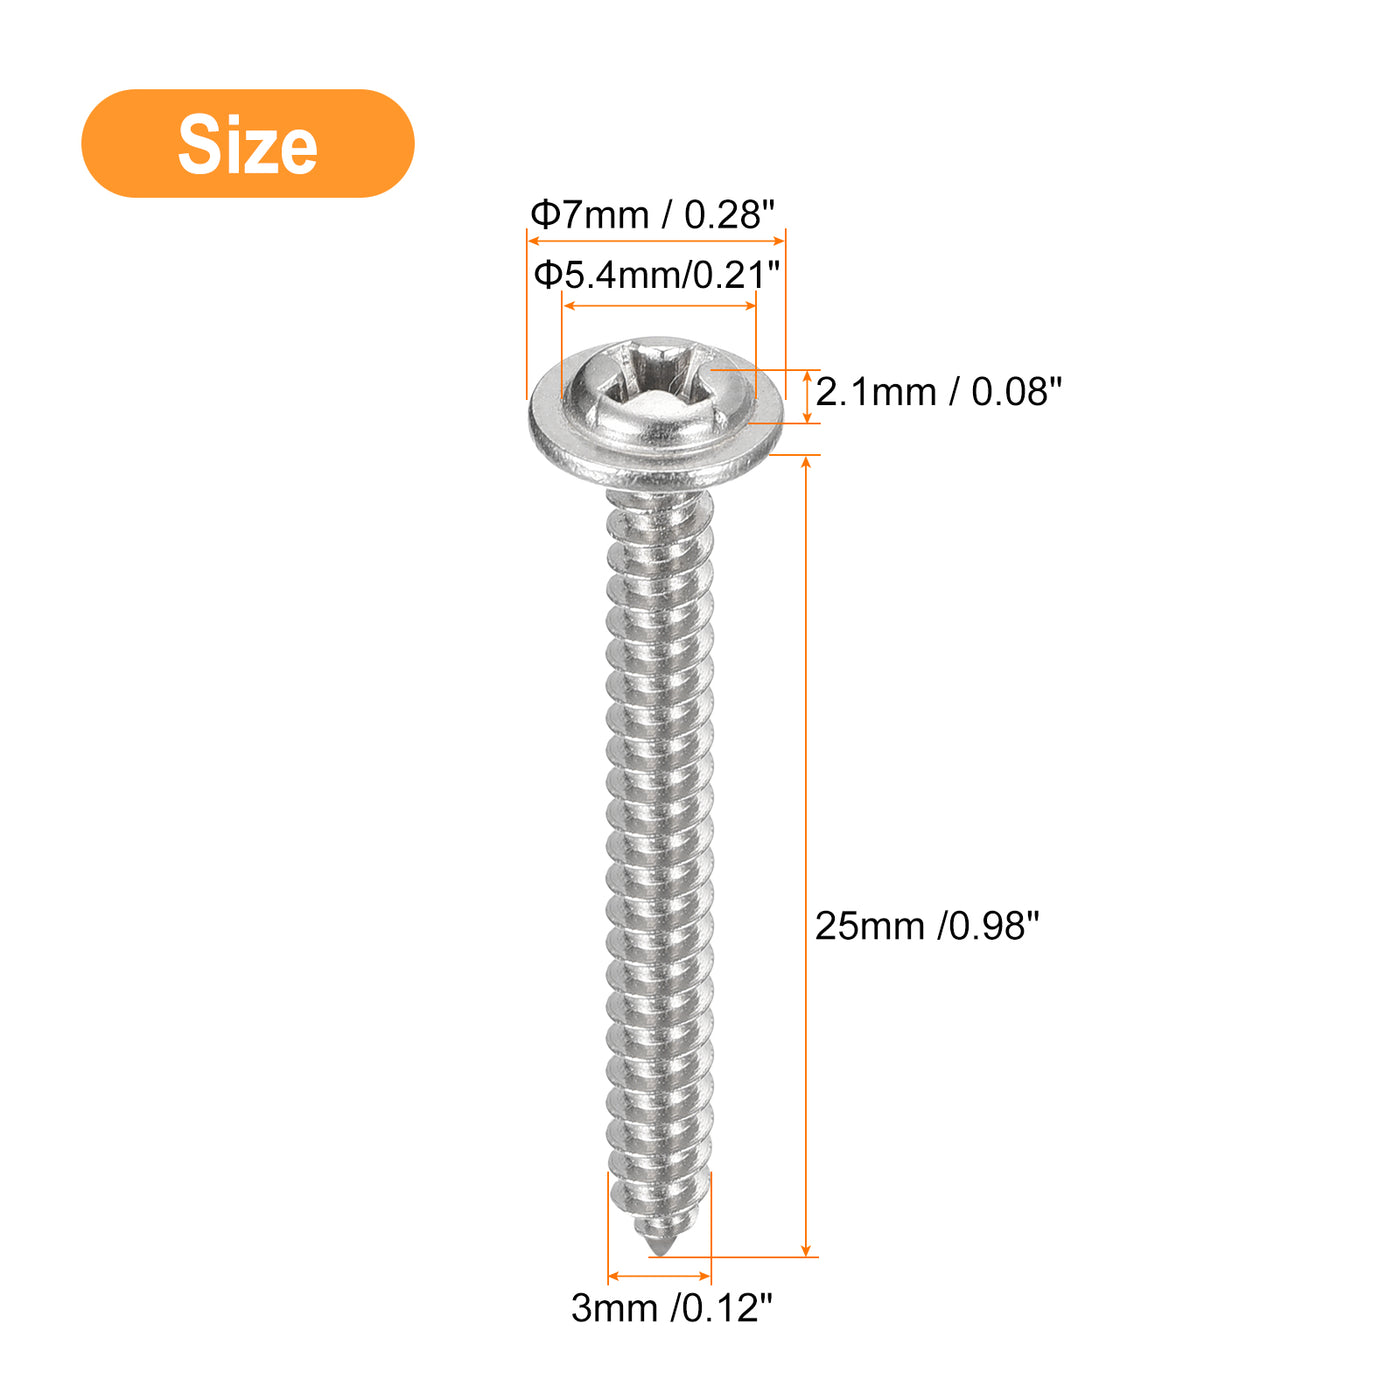 uxcell Uxcell ST3x25mm Phillips Pan Head Self-tapping Screw with Washer, 100pcs - 304 Stainless Steel Wood Screw Full Thread (Silver)